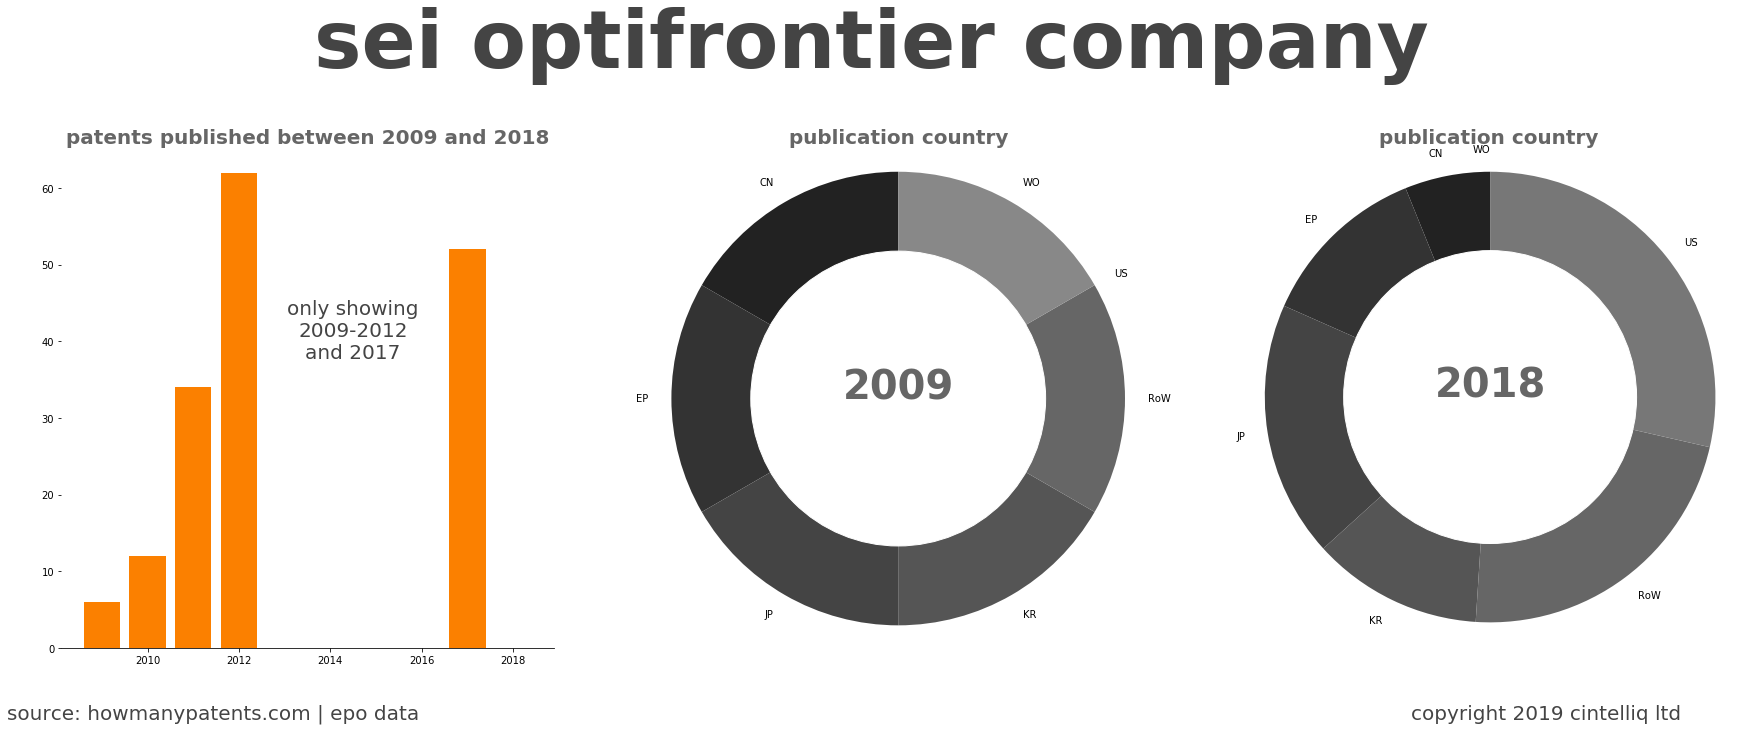 summary of patents for Sei Optifrontier Company